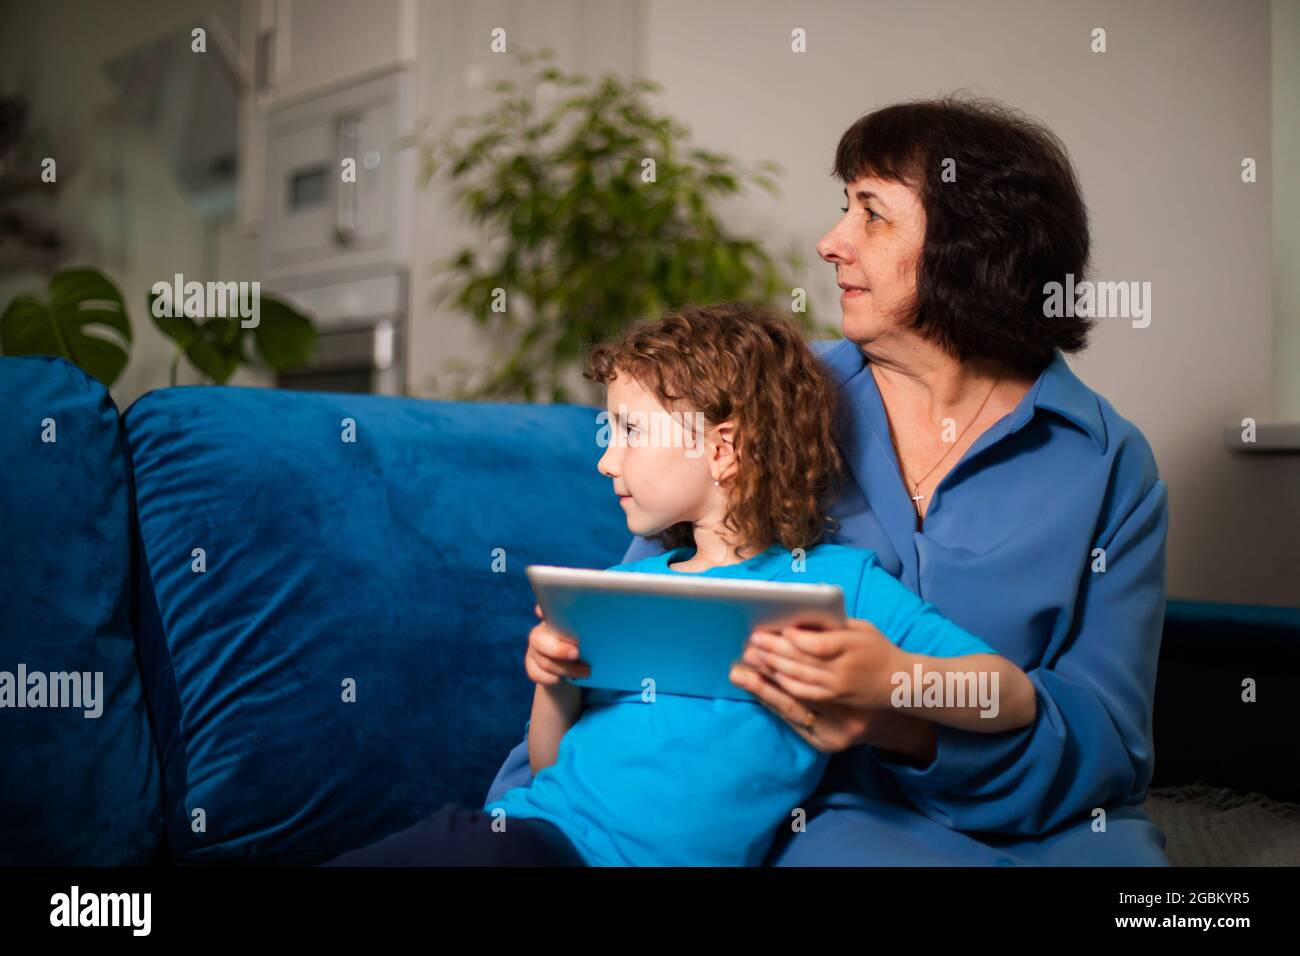 Grandma discovers means of online communication together with her granddaughter Stock Photo